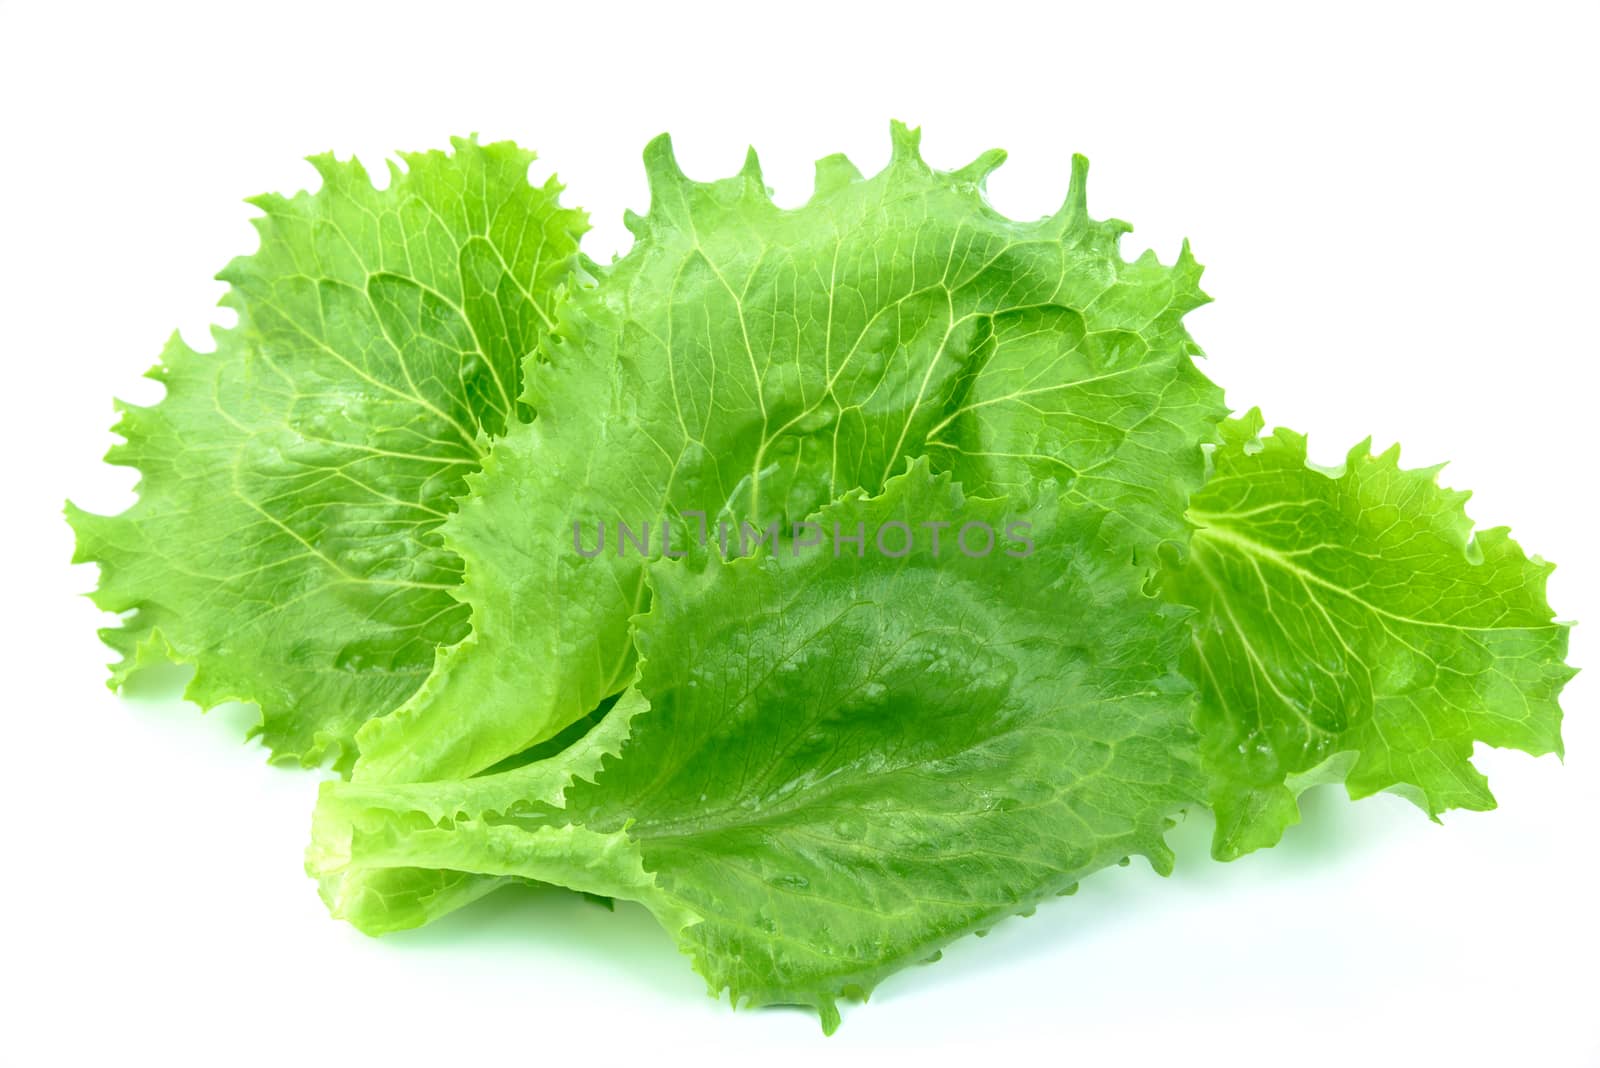 Fresh and wet green lettuce from organic farm isolated on a white background.